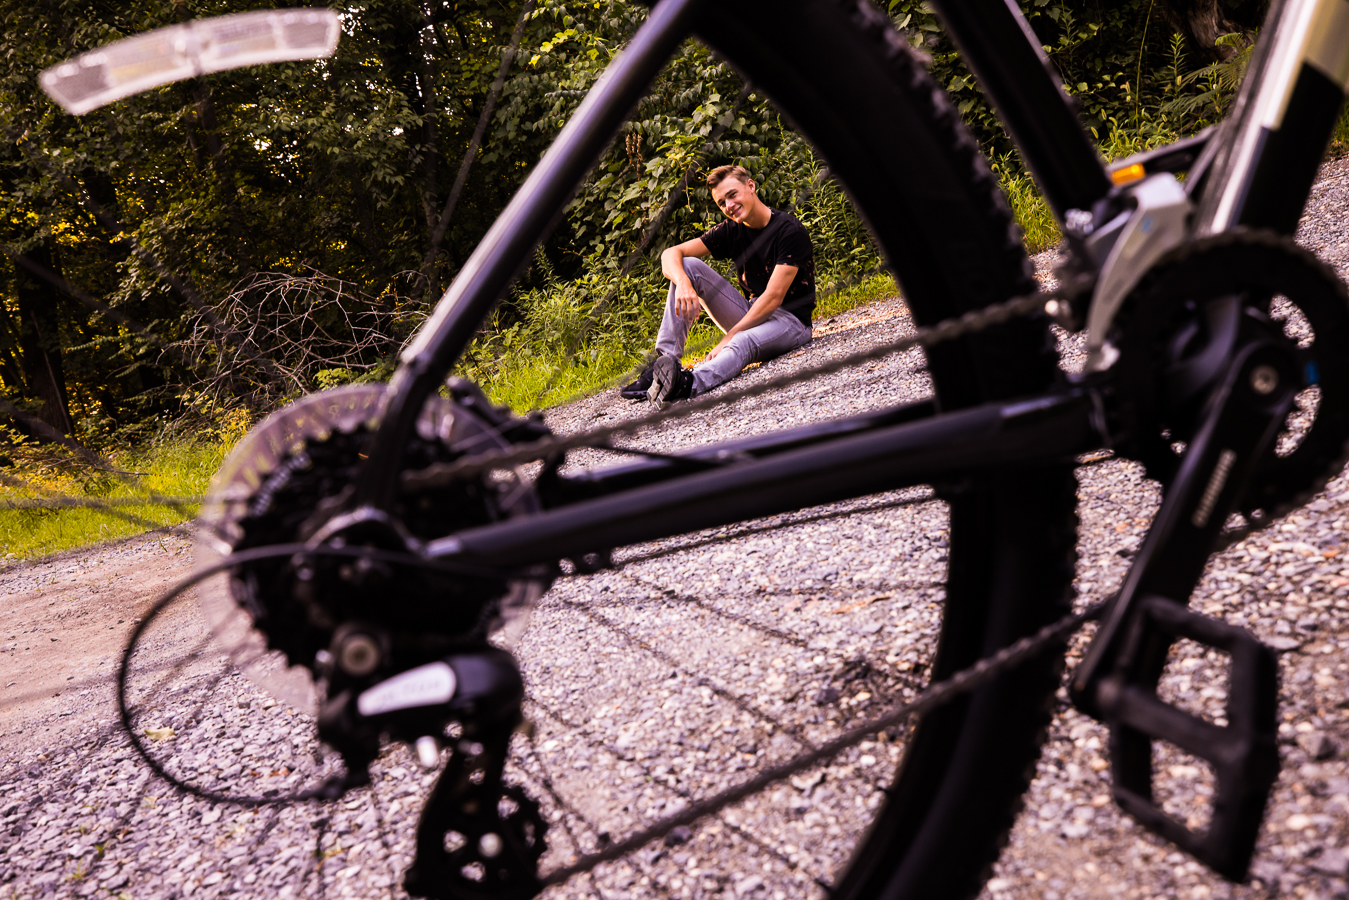 Creative Portrait Photographer, lisa rhinehart, captures this unique creative perspective of this senior through the wheel of his bike during this outdoor session in shippensburg pa 